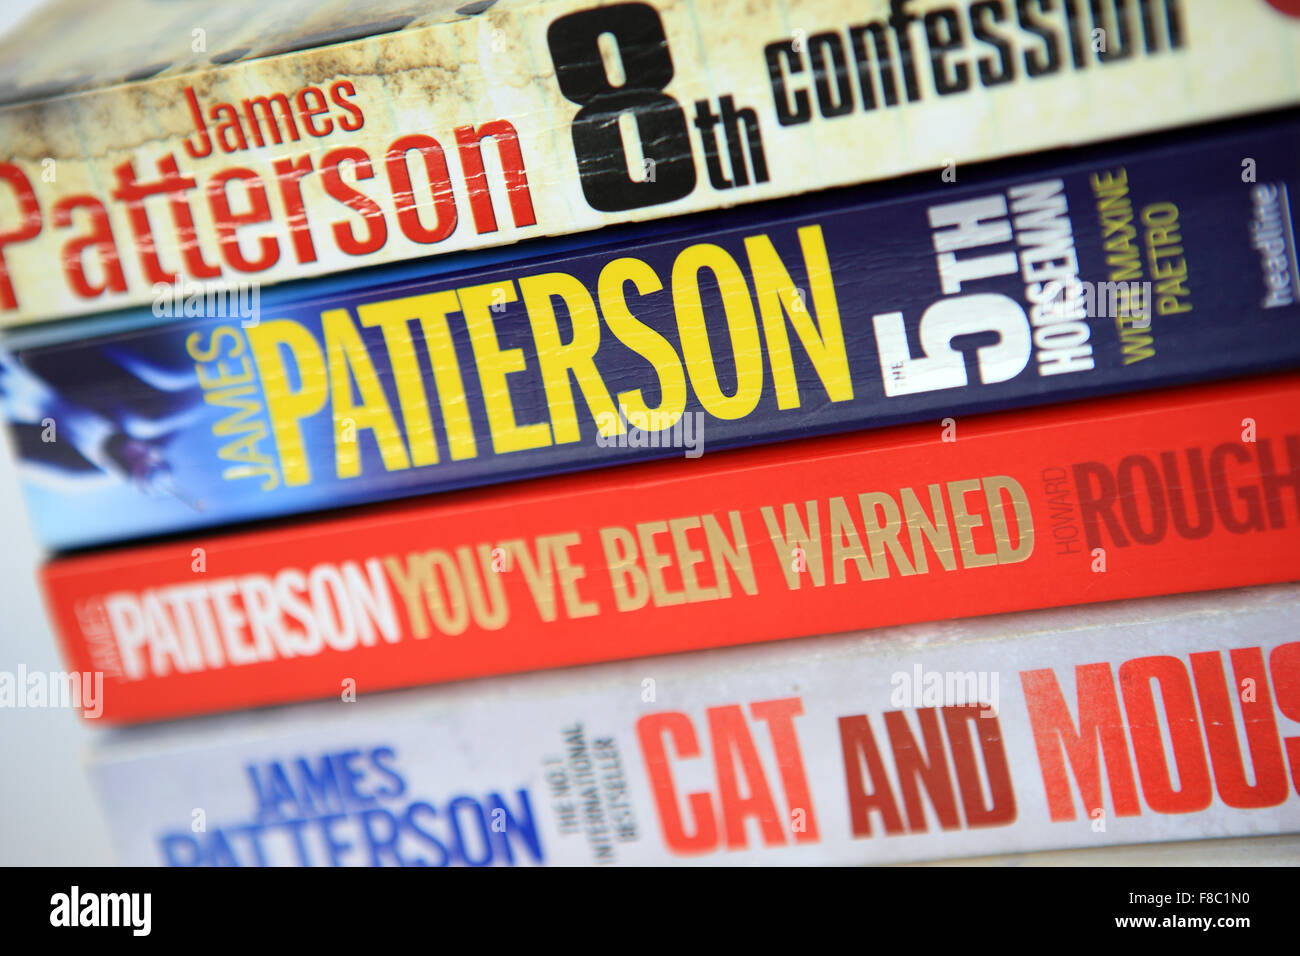 Novels by James Patterson an American author Stock Photo